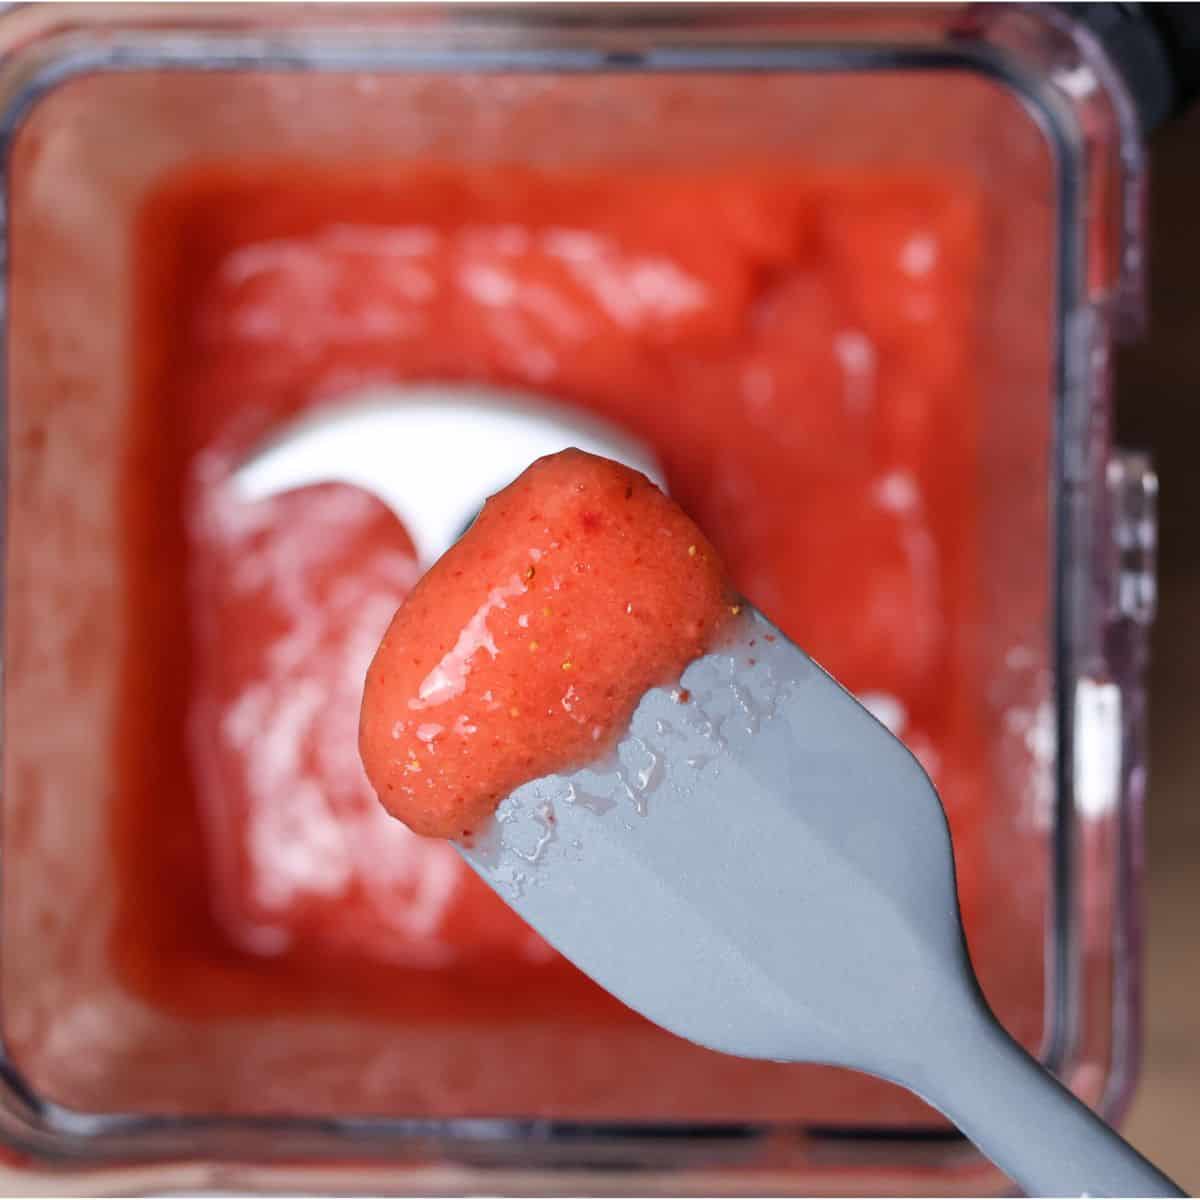 A spatula scooping out a sample of the thick strawberry smoothie from the blender, indicating a taste test for flavor.